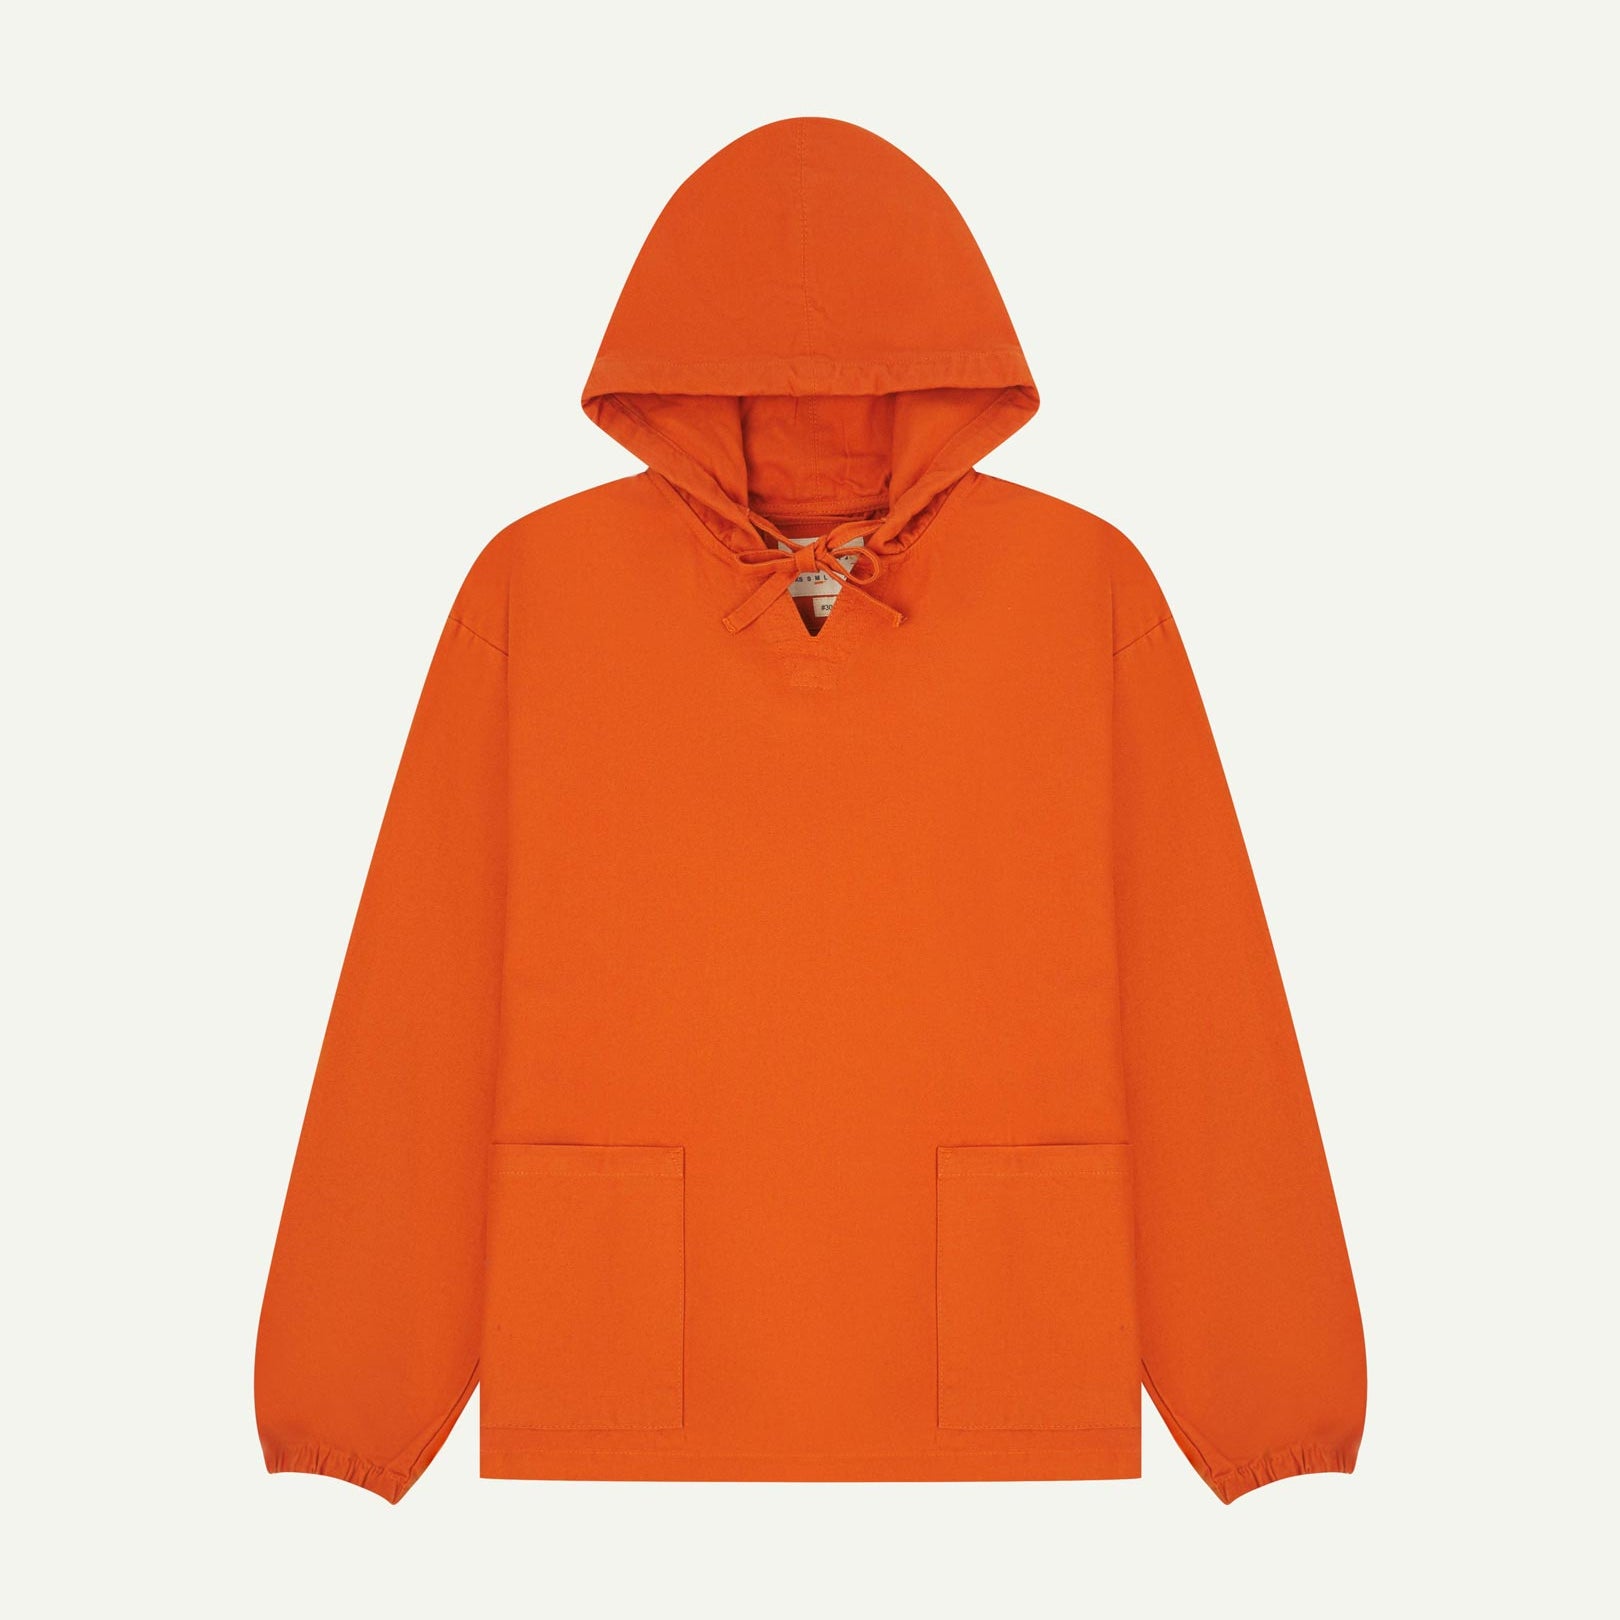 Full-length front flat view of gold-orange smock from Uskees, showing large front hip pockets, drawstring base and hood.